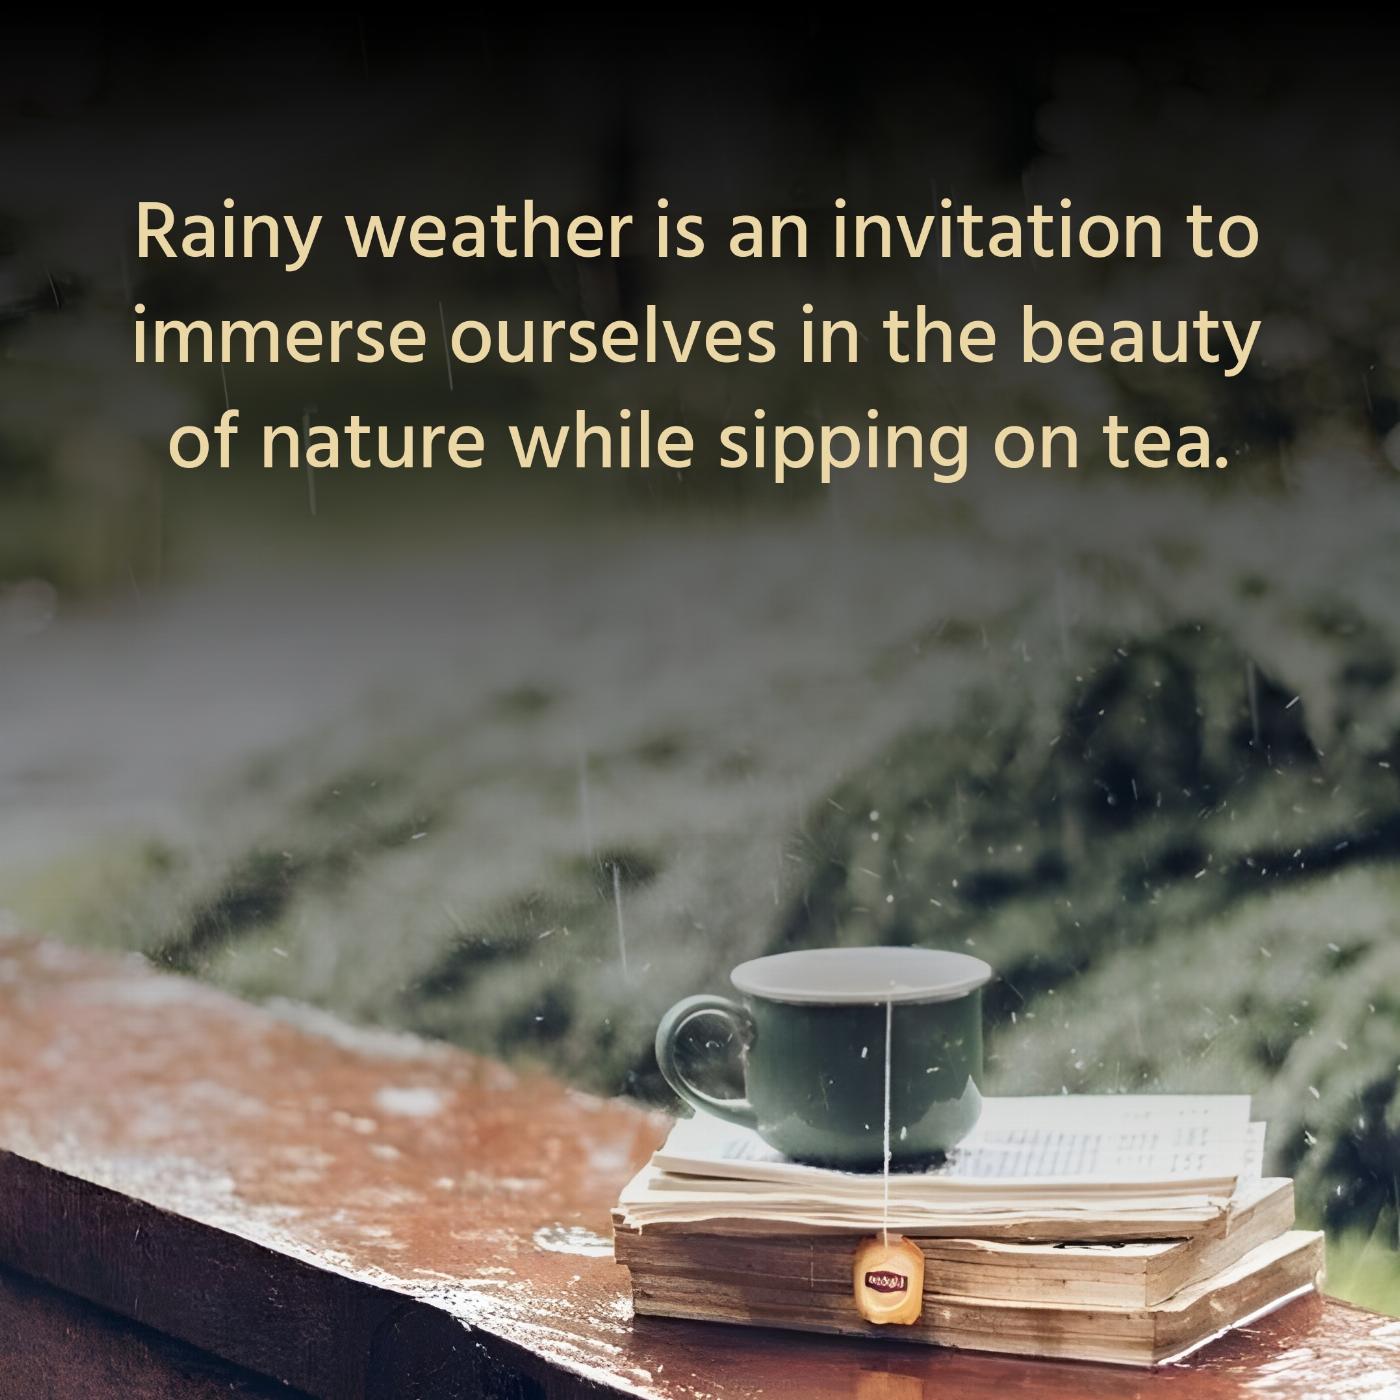 Rainy weather is an invitation to immerse ourselves in the beauty of nature